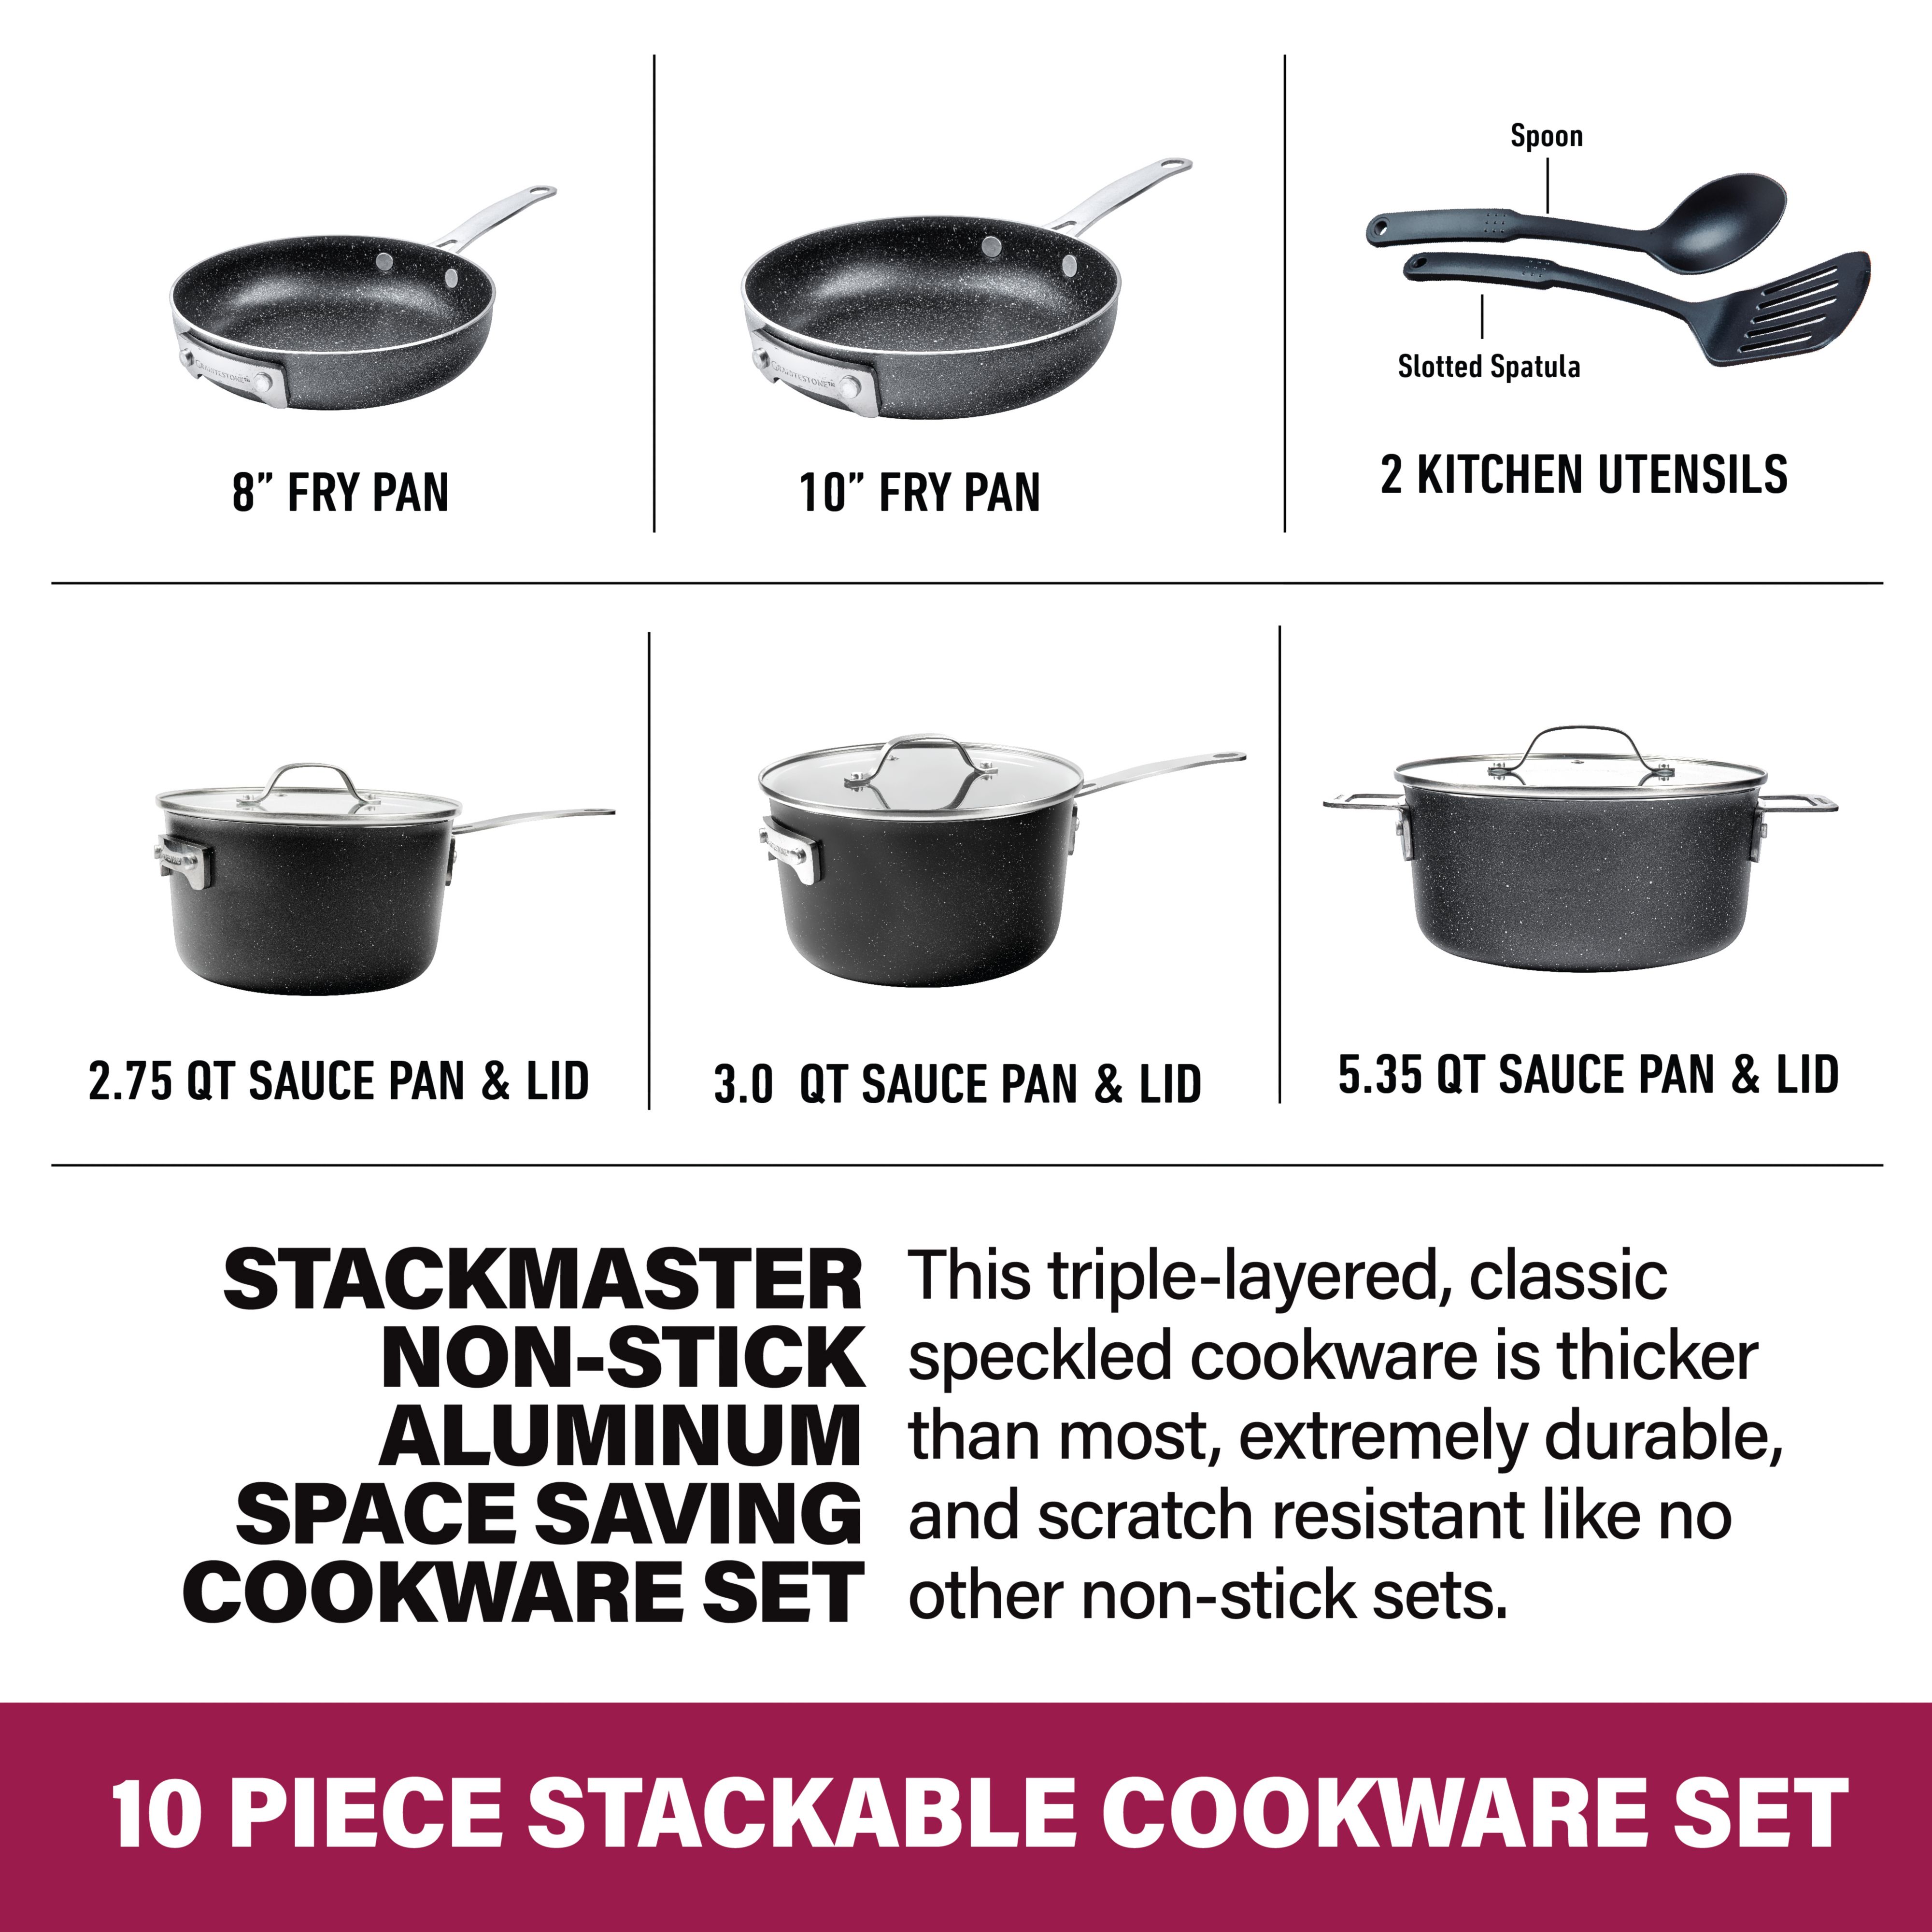 1012cookware 10 Piece Cookware Sets Granite Stone Cookware Pot Large Size  Non Stick Pan